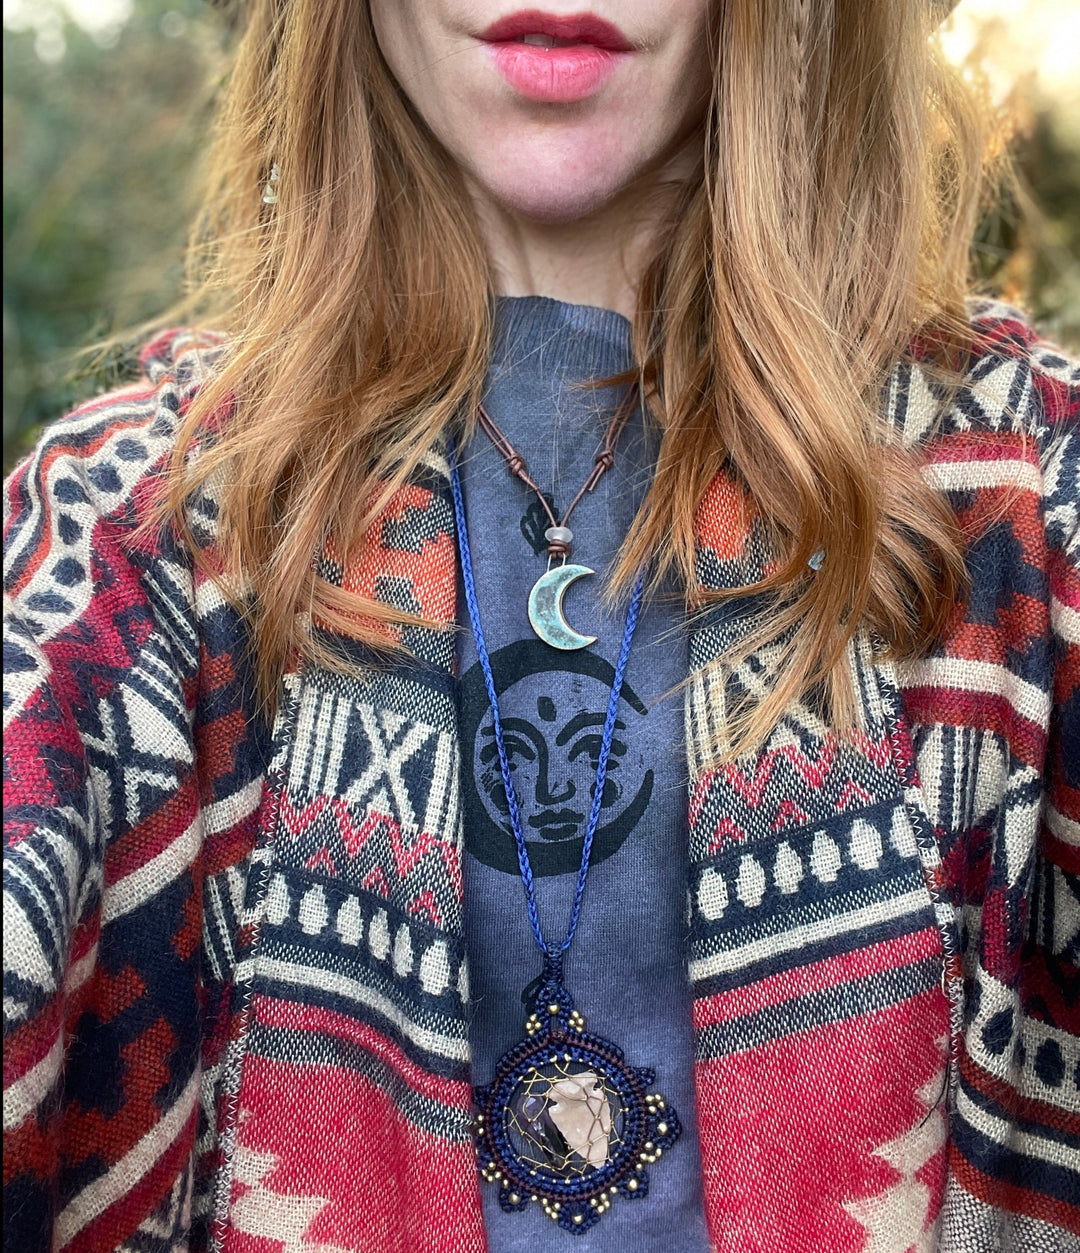 Psychedelic Moon Ethical Sweater - Hand Dyed & Block Printed, Organic, Fair Trade, Climate Neutral Hippie Moon Sweatshirt